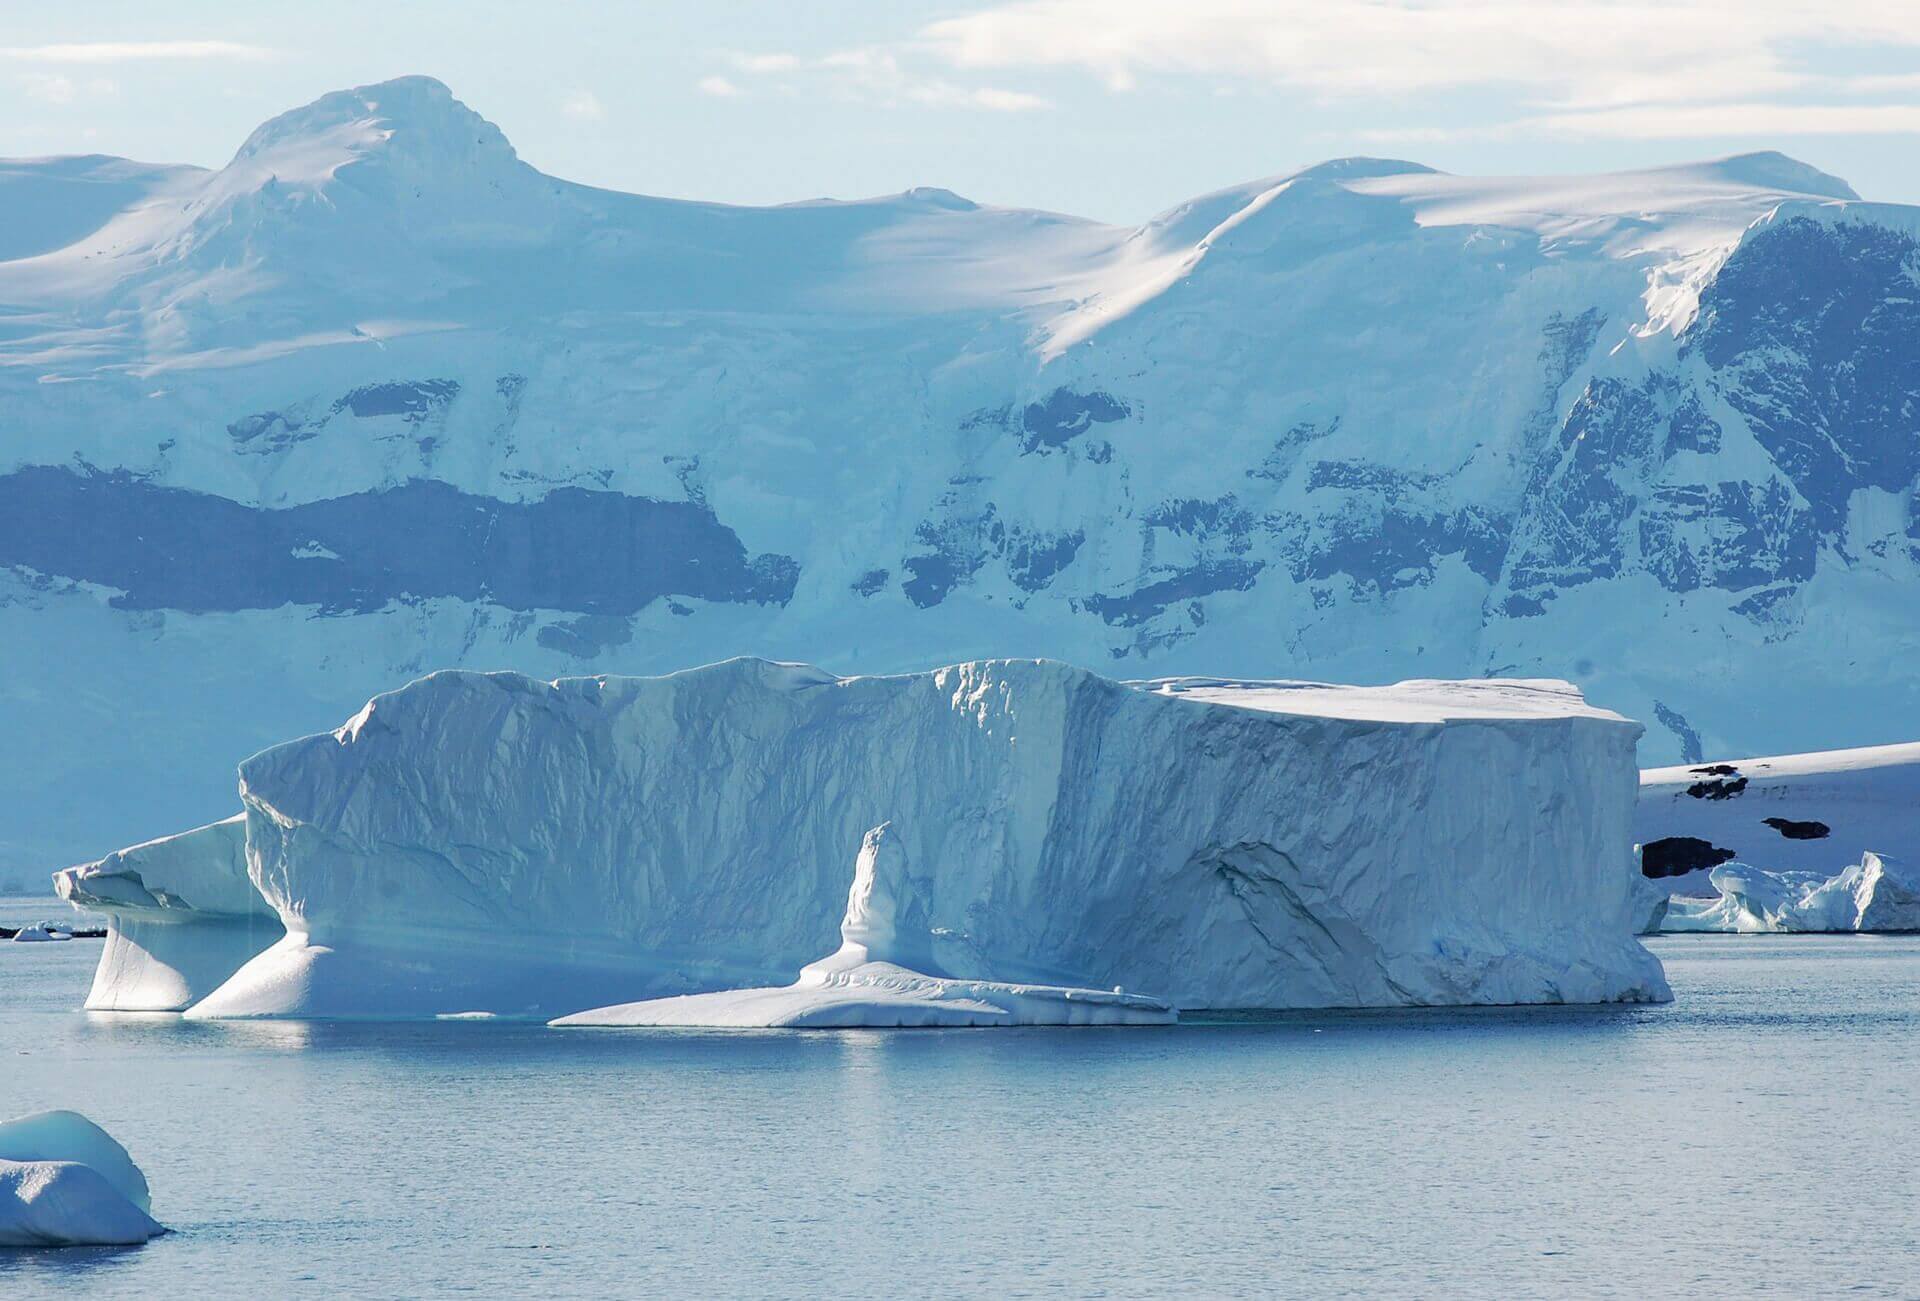 View of enormous iceberg in Antarctica with snow covered mountains in the background